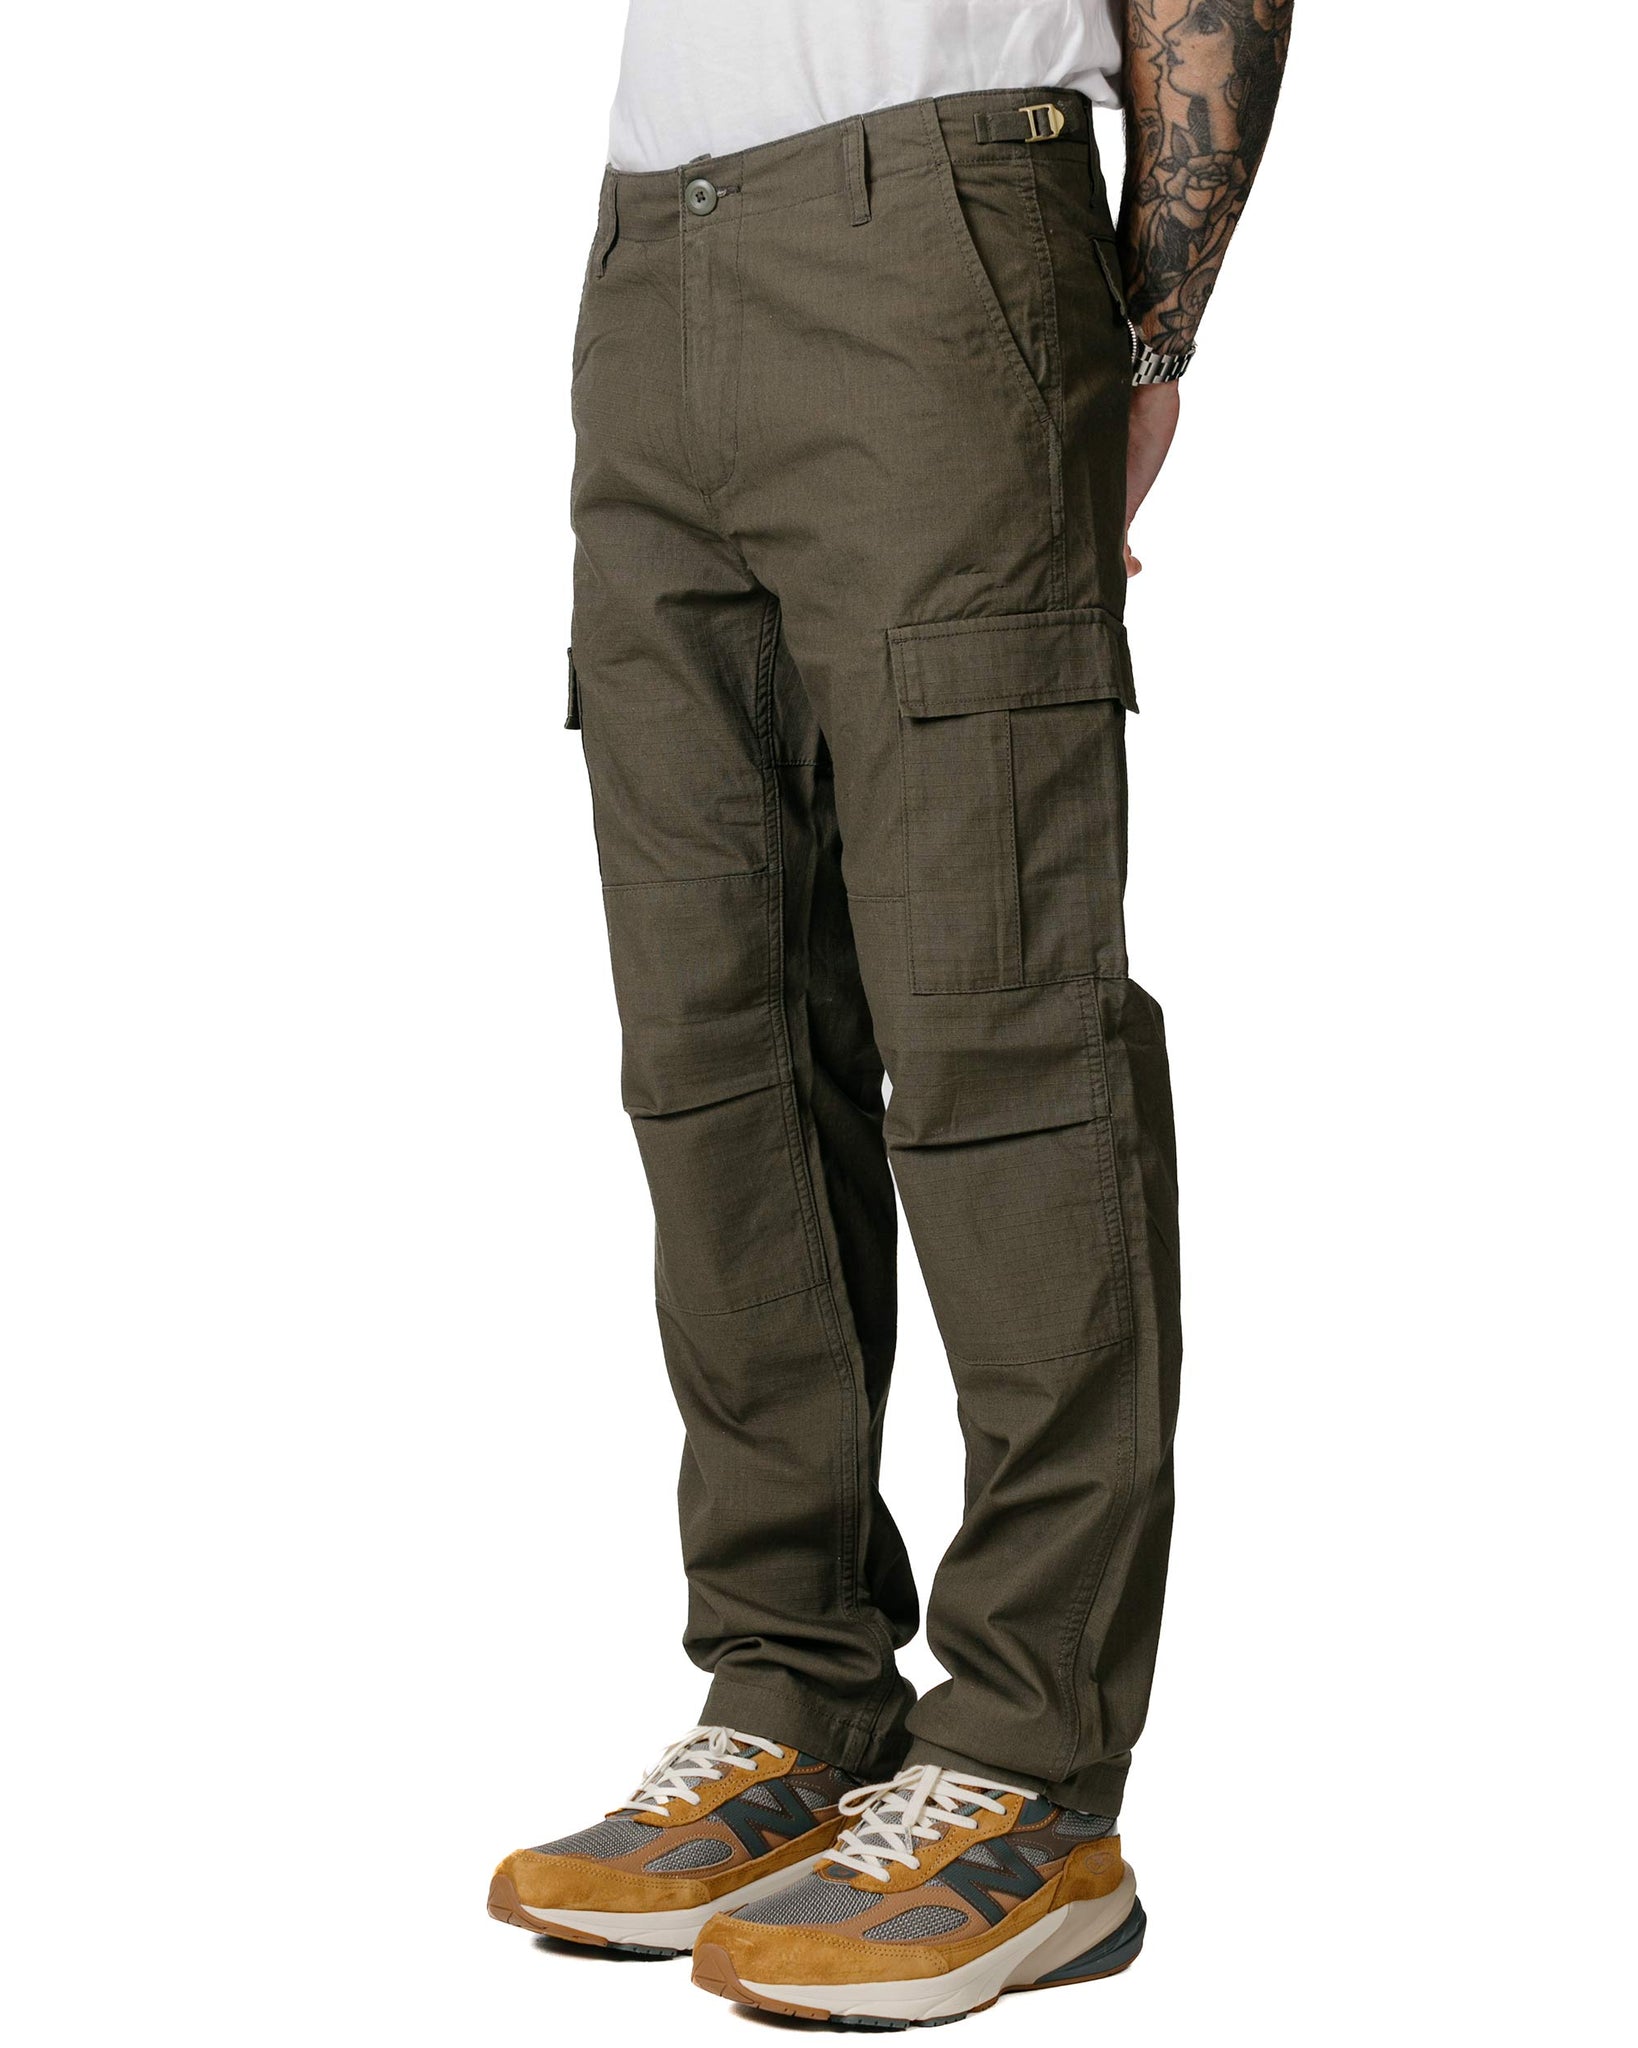 Carhartt WIP Aviation Pants | Rinsed Leather | Aphrodite1994